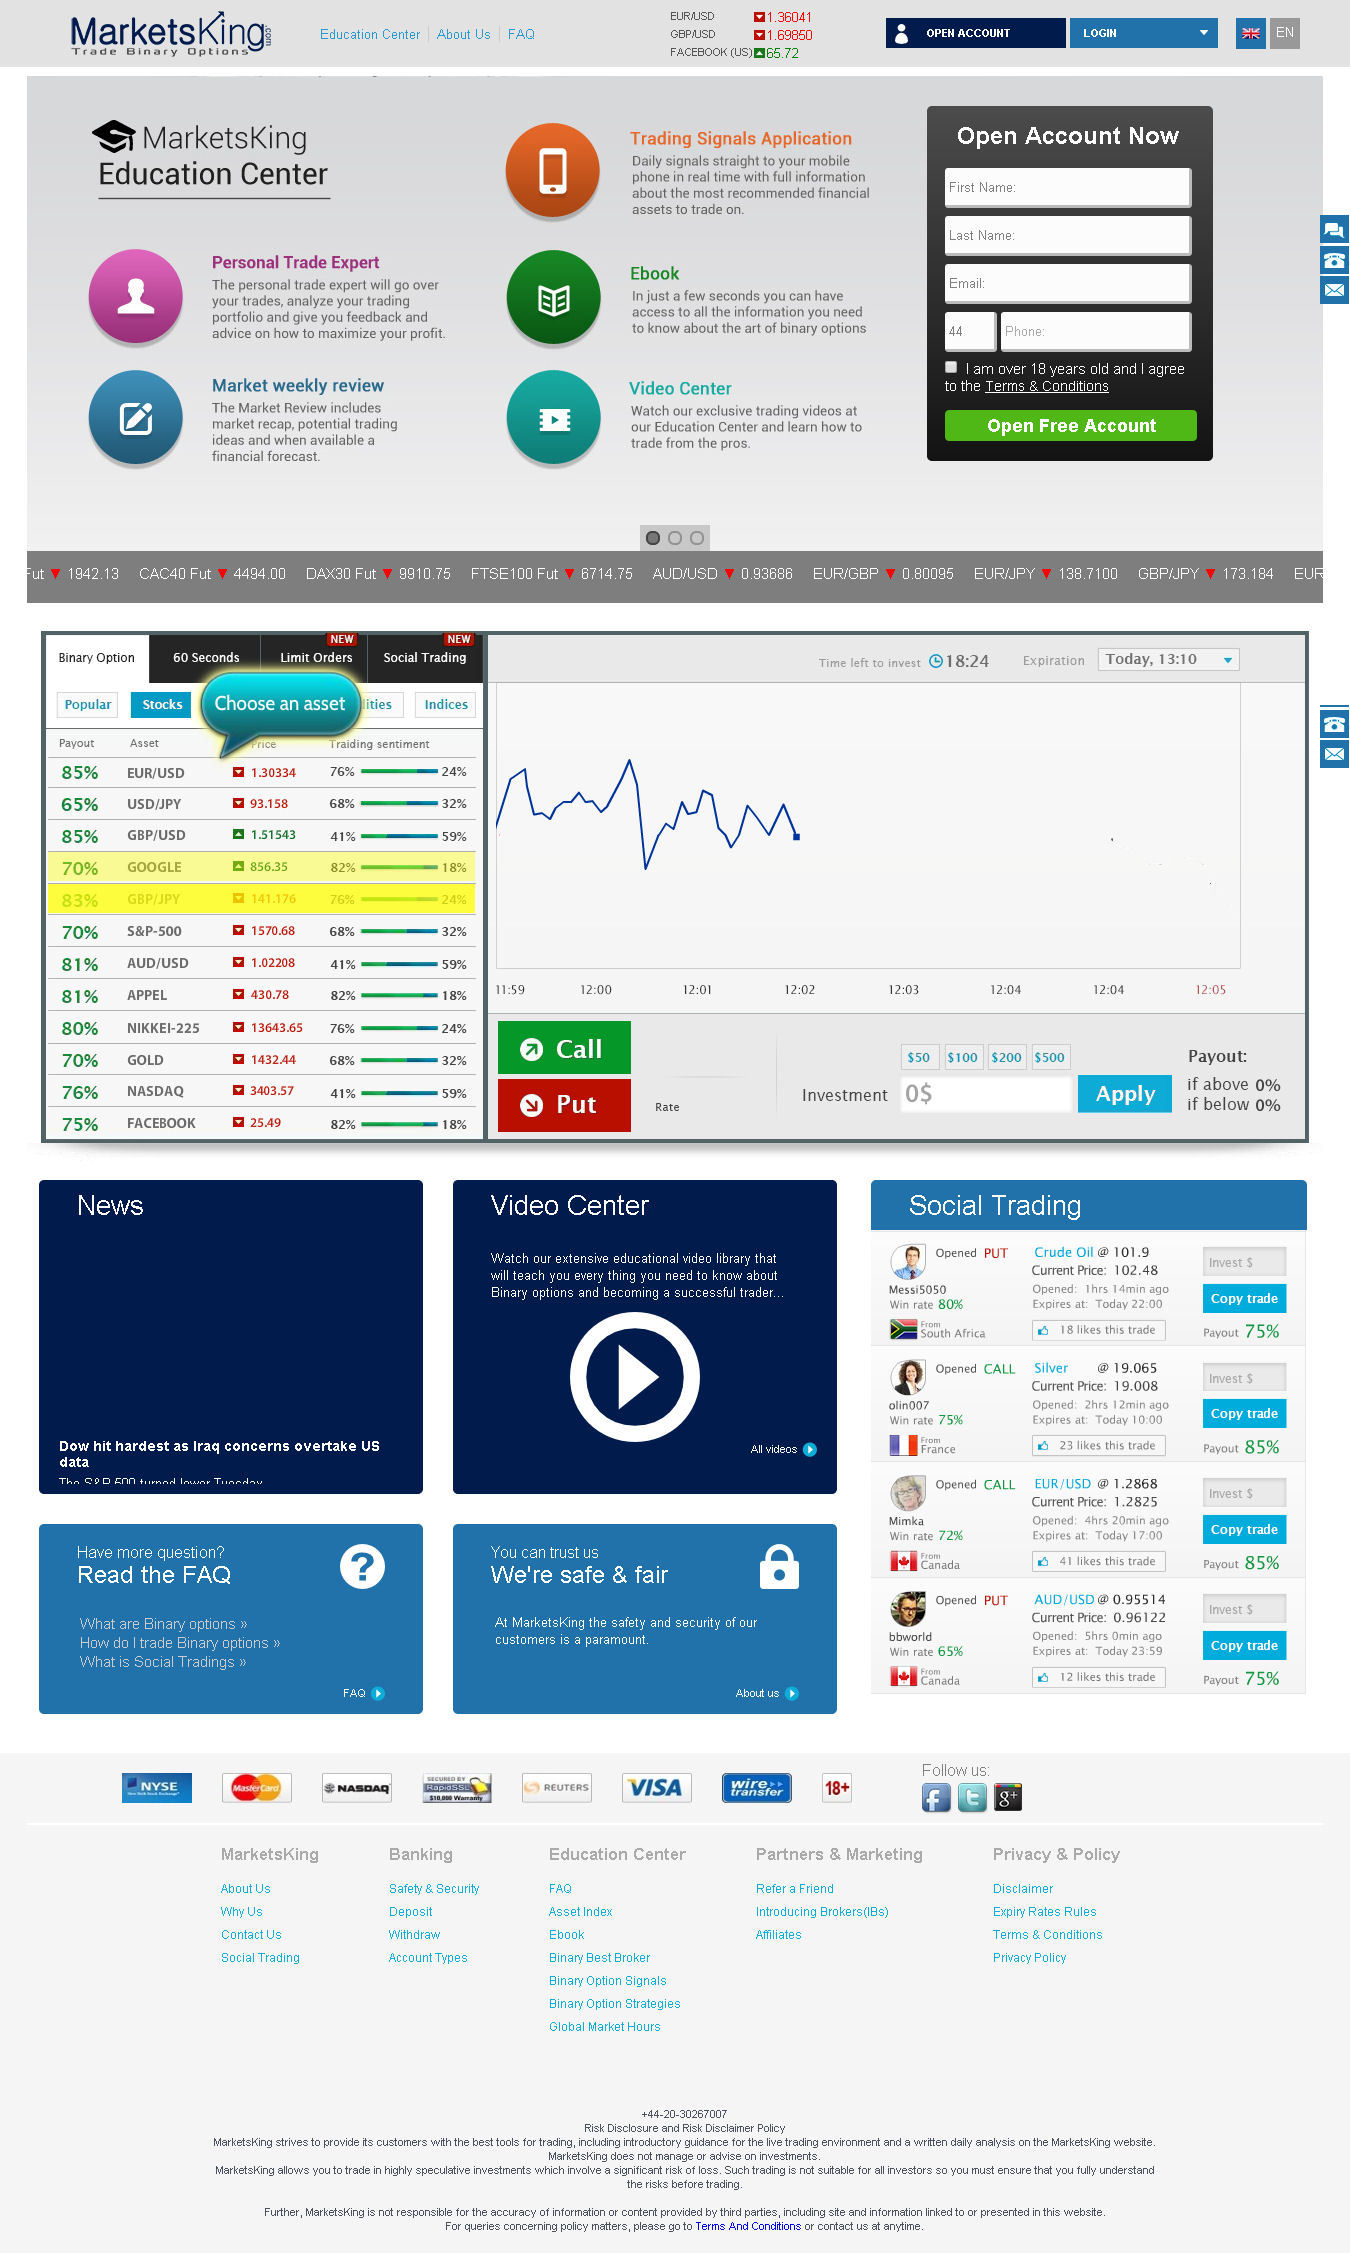 Binary options squeeze page